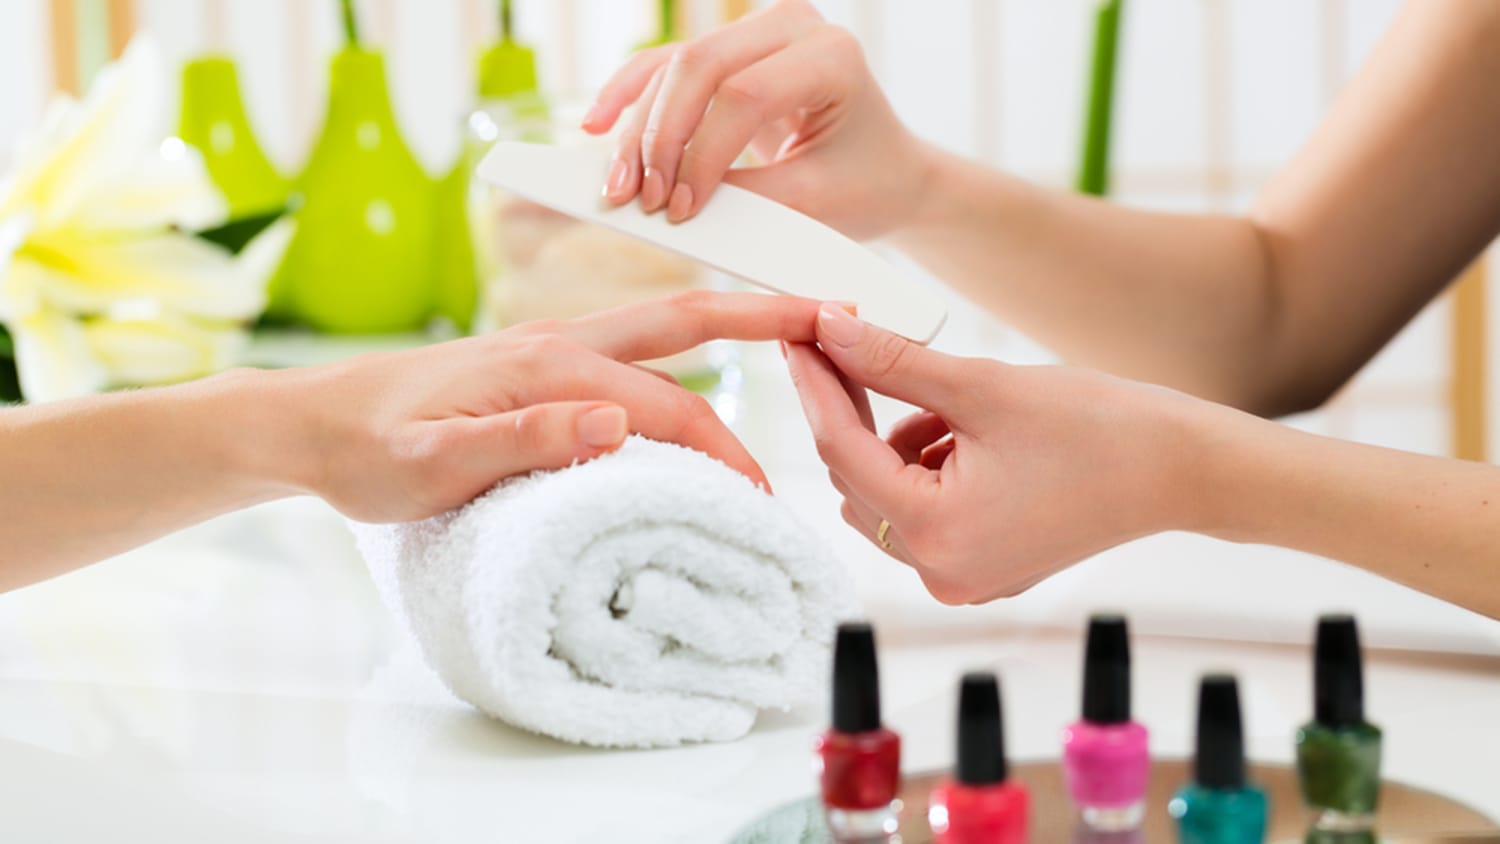 How Much to Tip at the Nail Salon in 2023, According to Experts